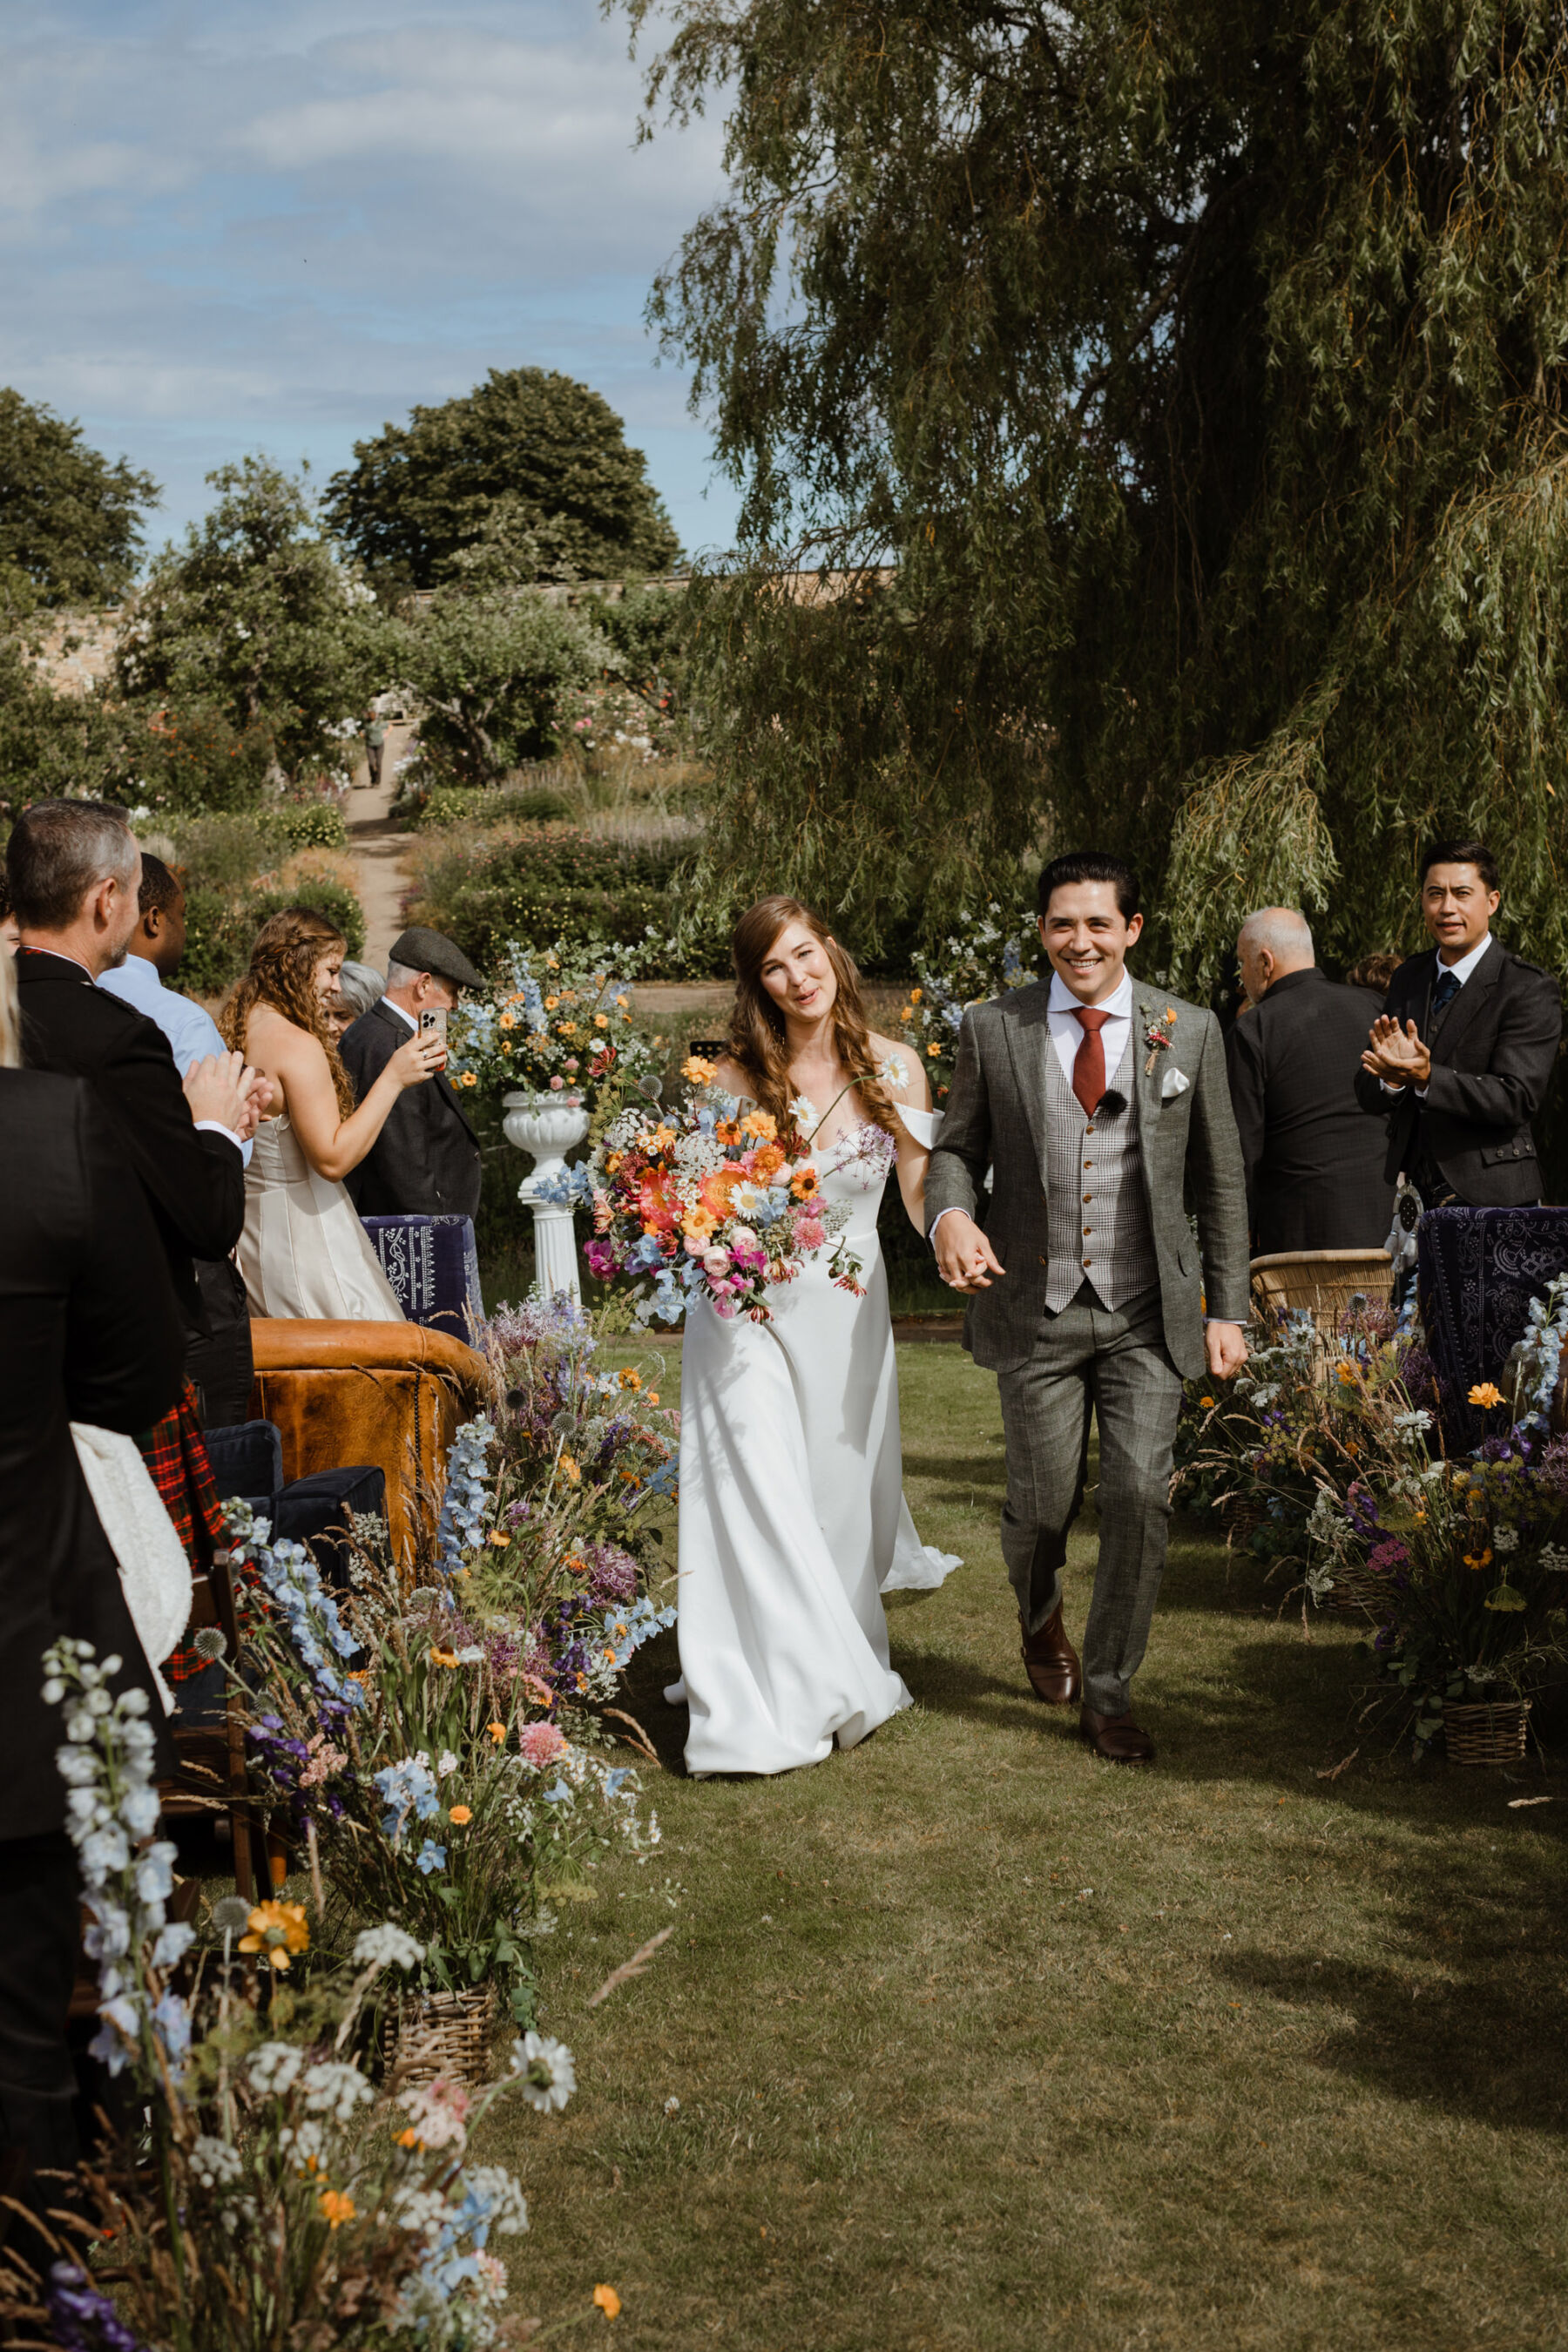 Outdoor wedding cermeony lined with A Cambo Estate wedding